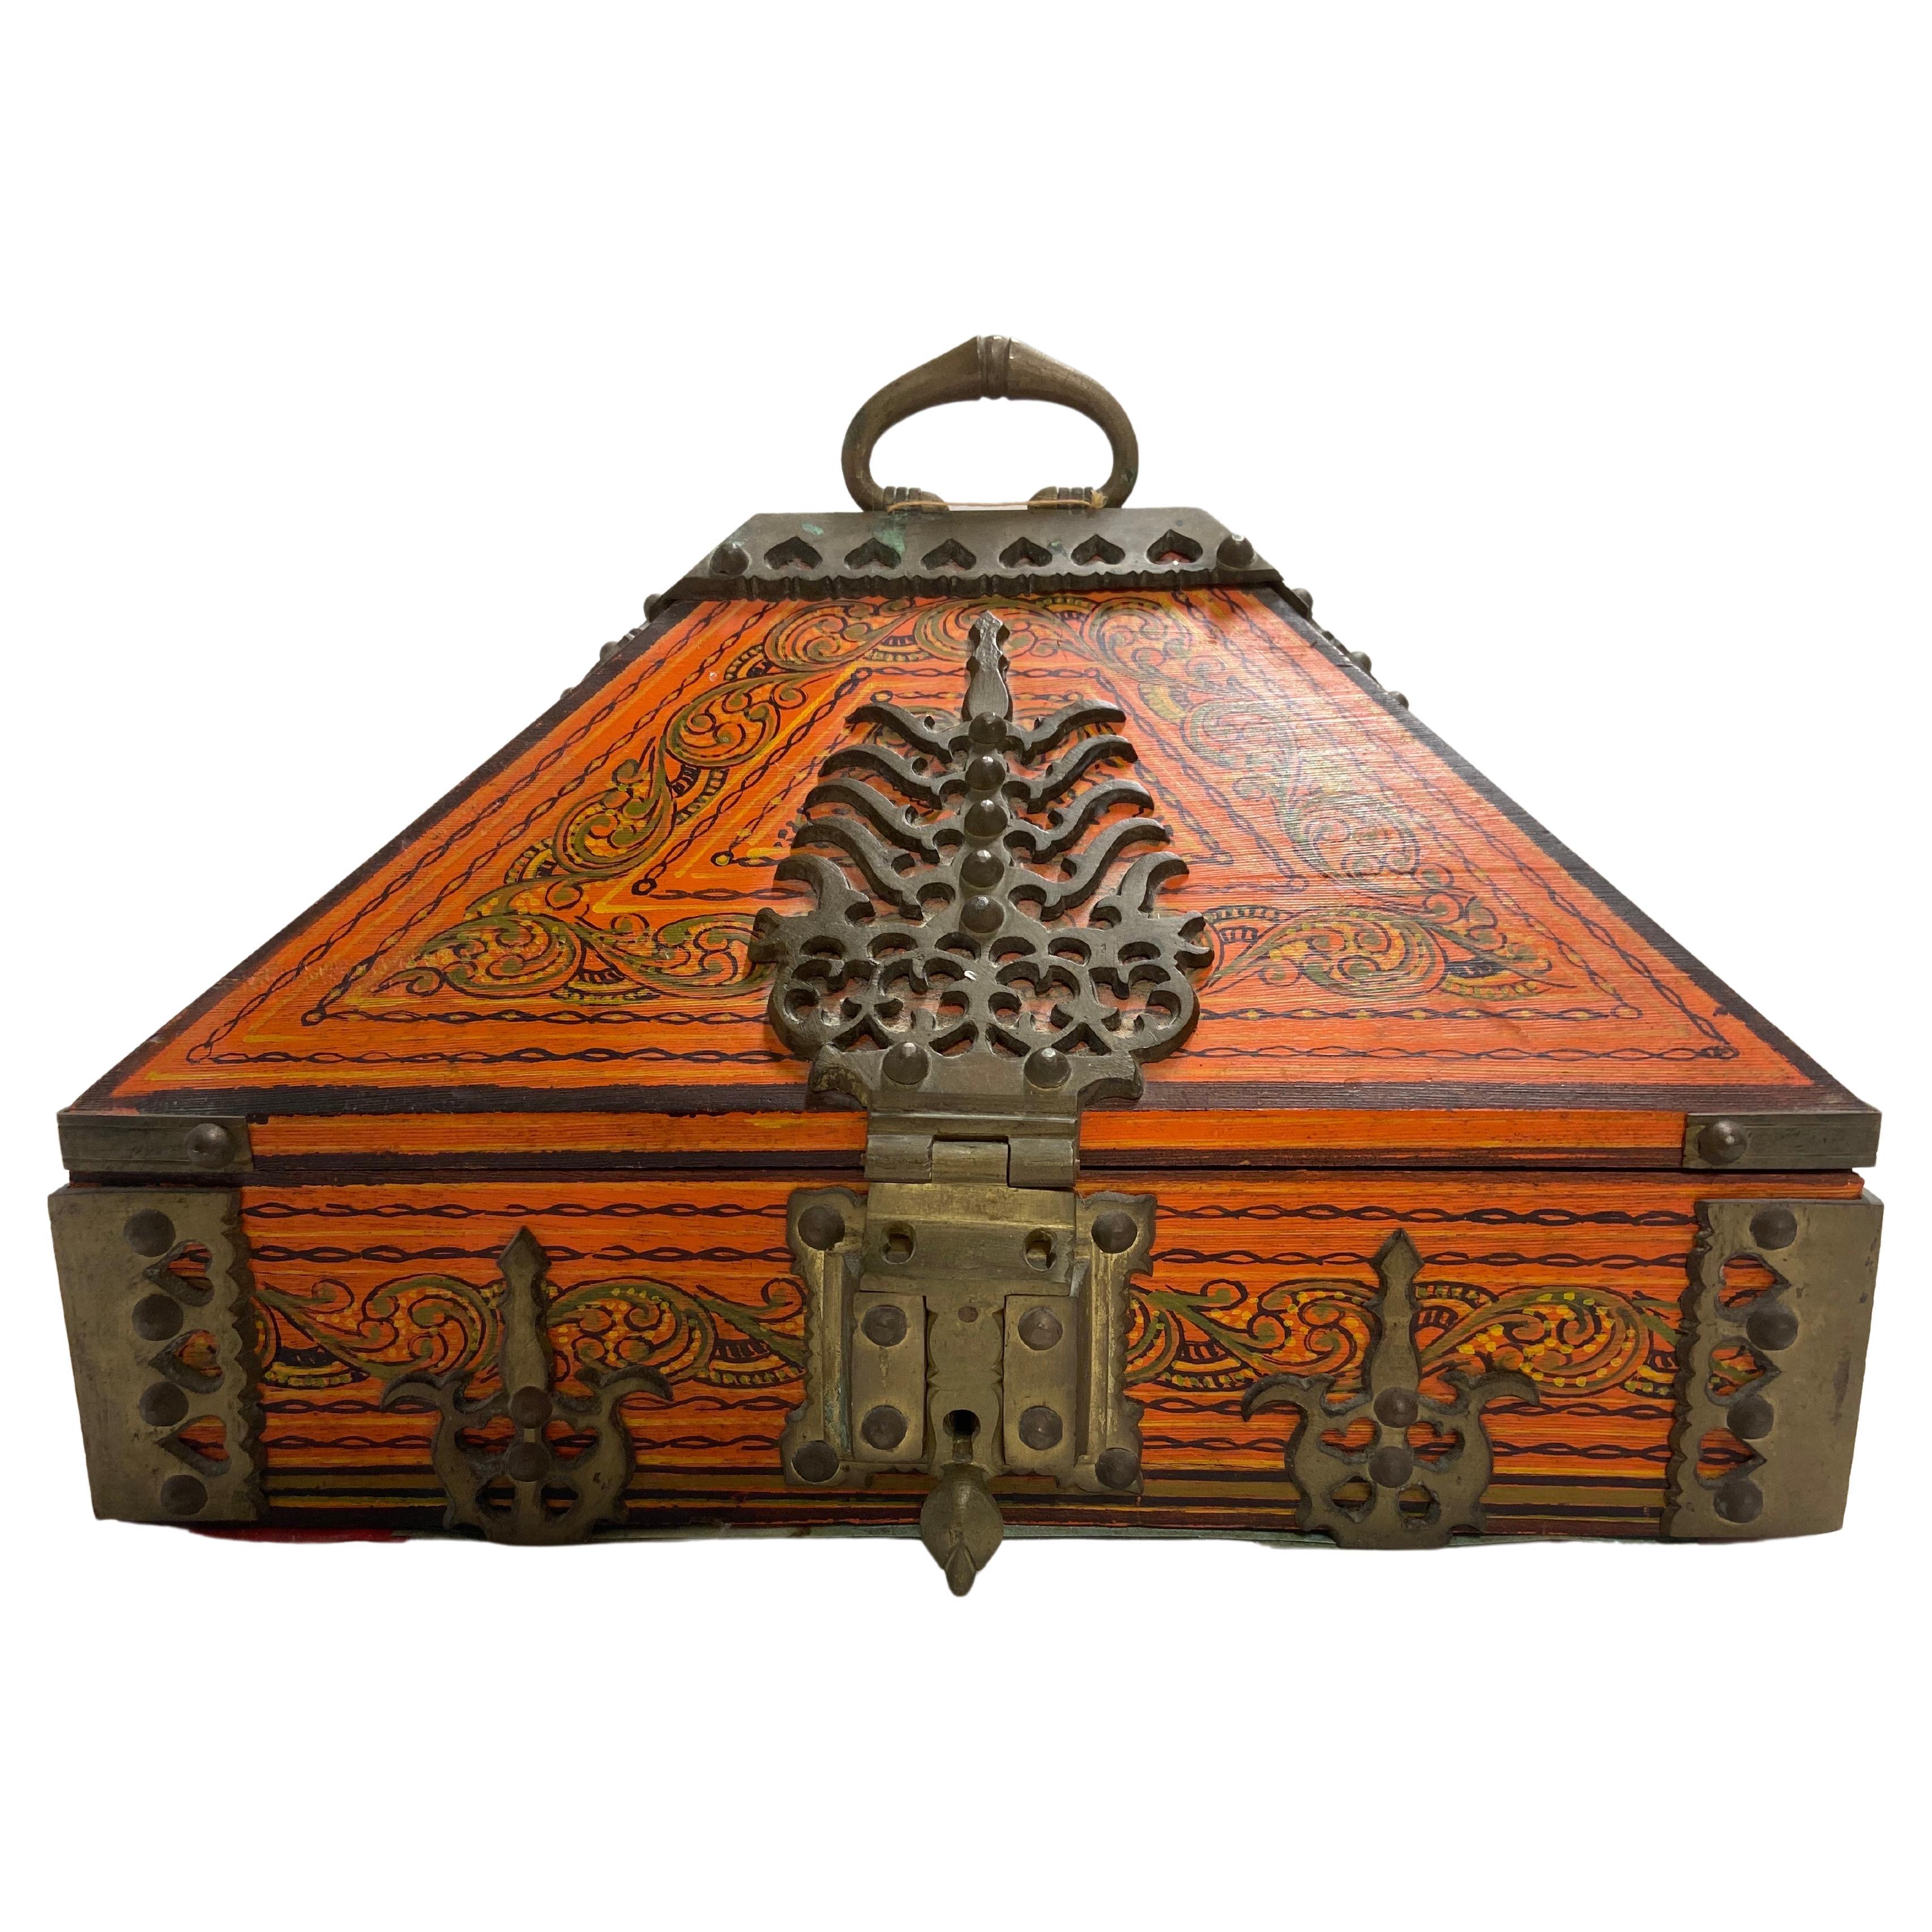 A vintage Indian Dowry box in orange paint with beautiful hand painted details and decorations, secured with ornate and scrolling brass hinges, handle and clasp. The box also has an interior compartment with hand painted decoration as well. A bit